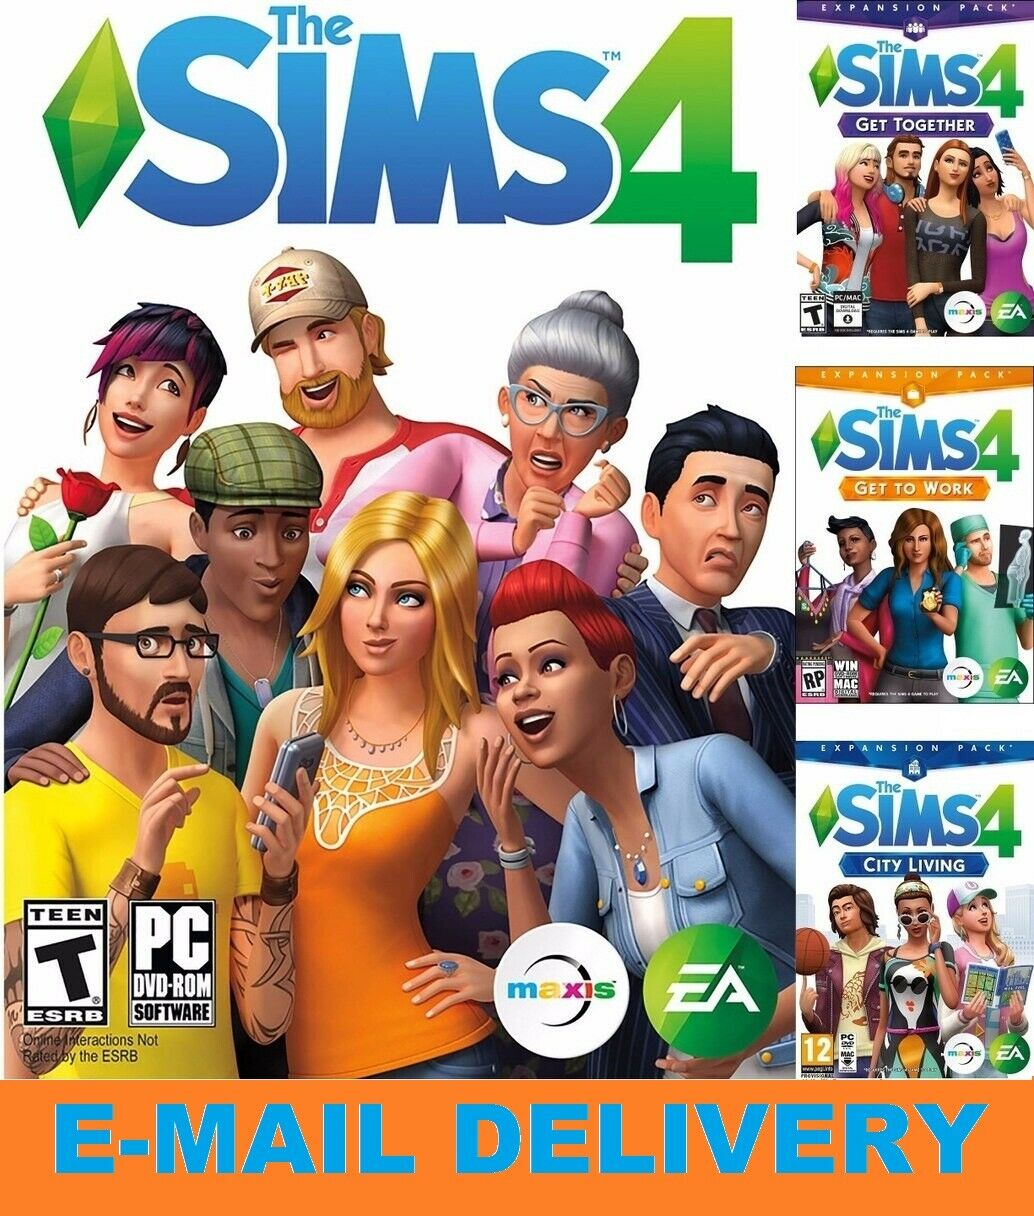 sims 4 download with all dlcs